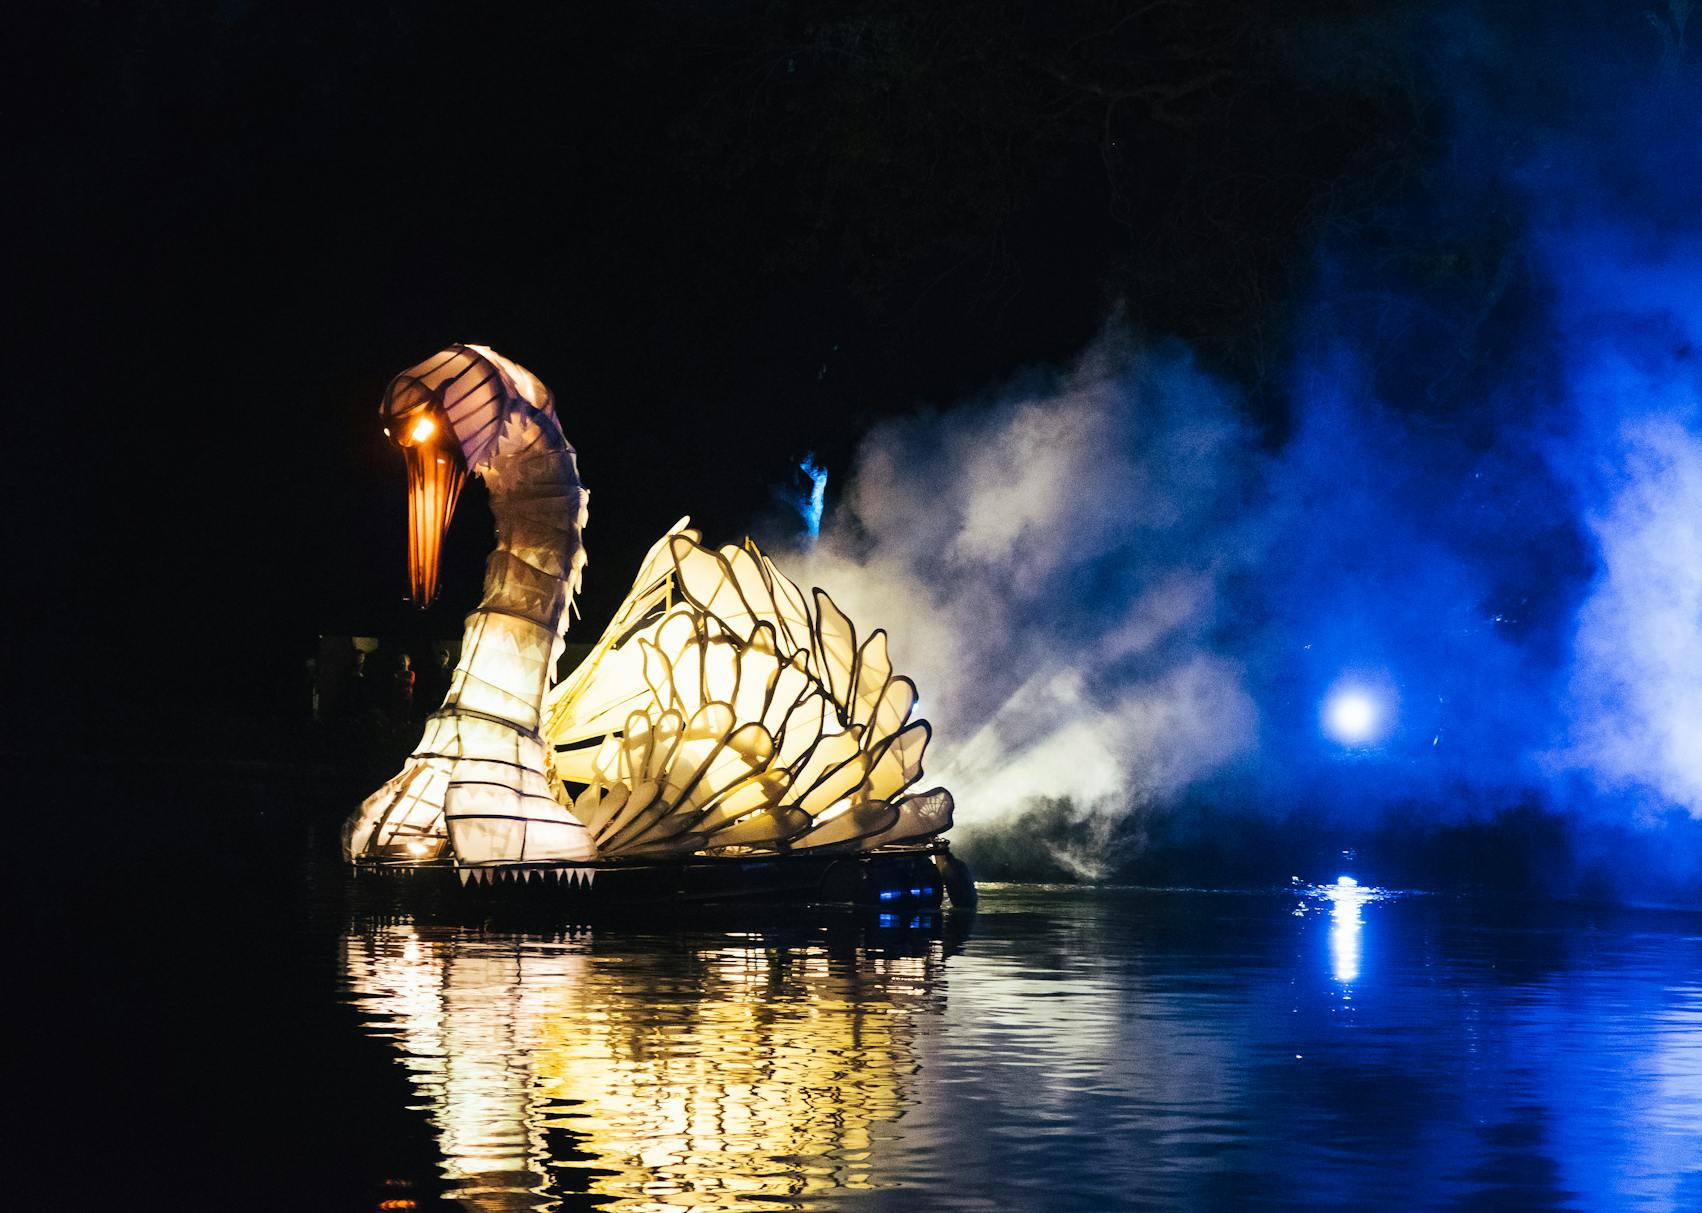 A large swan travelling along the water, lit from the inside and emerging from fog